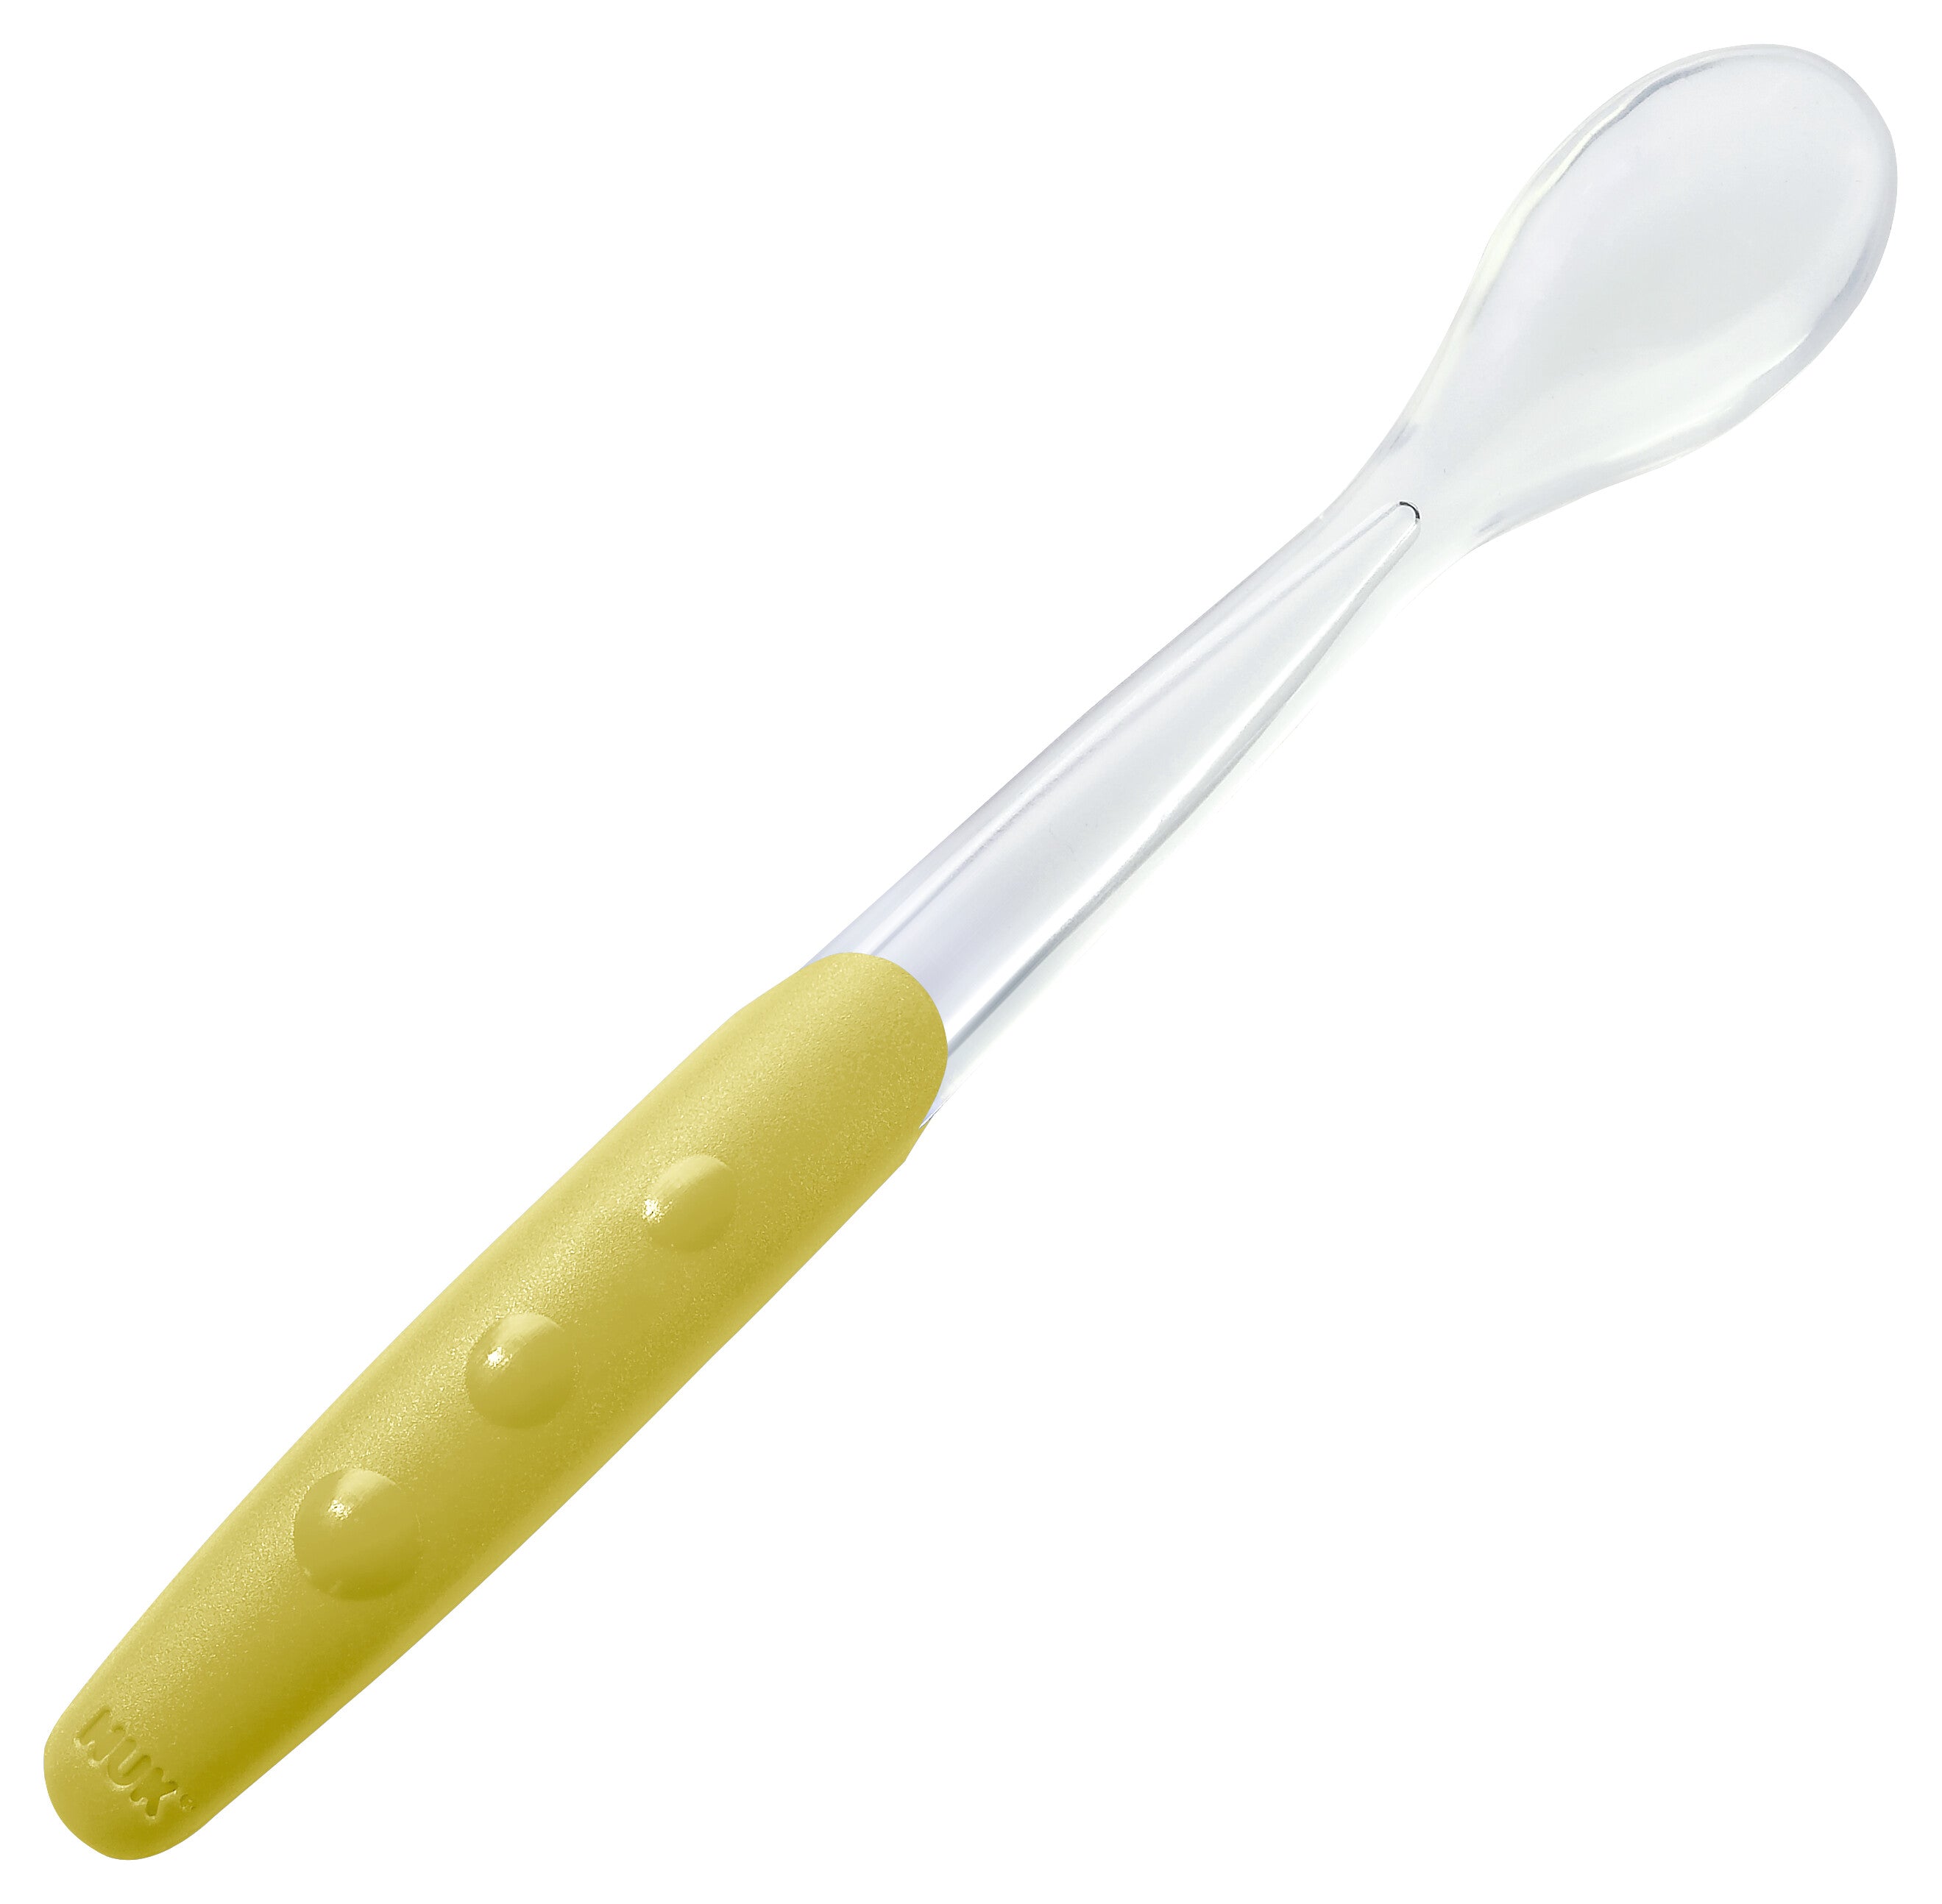 Nuk Easy Learning Soft Spoons 2 Pcs Pack